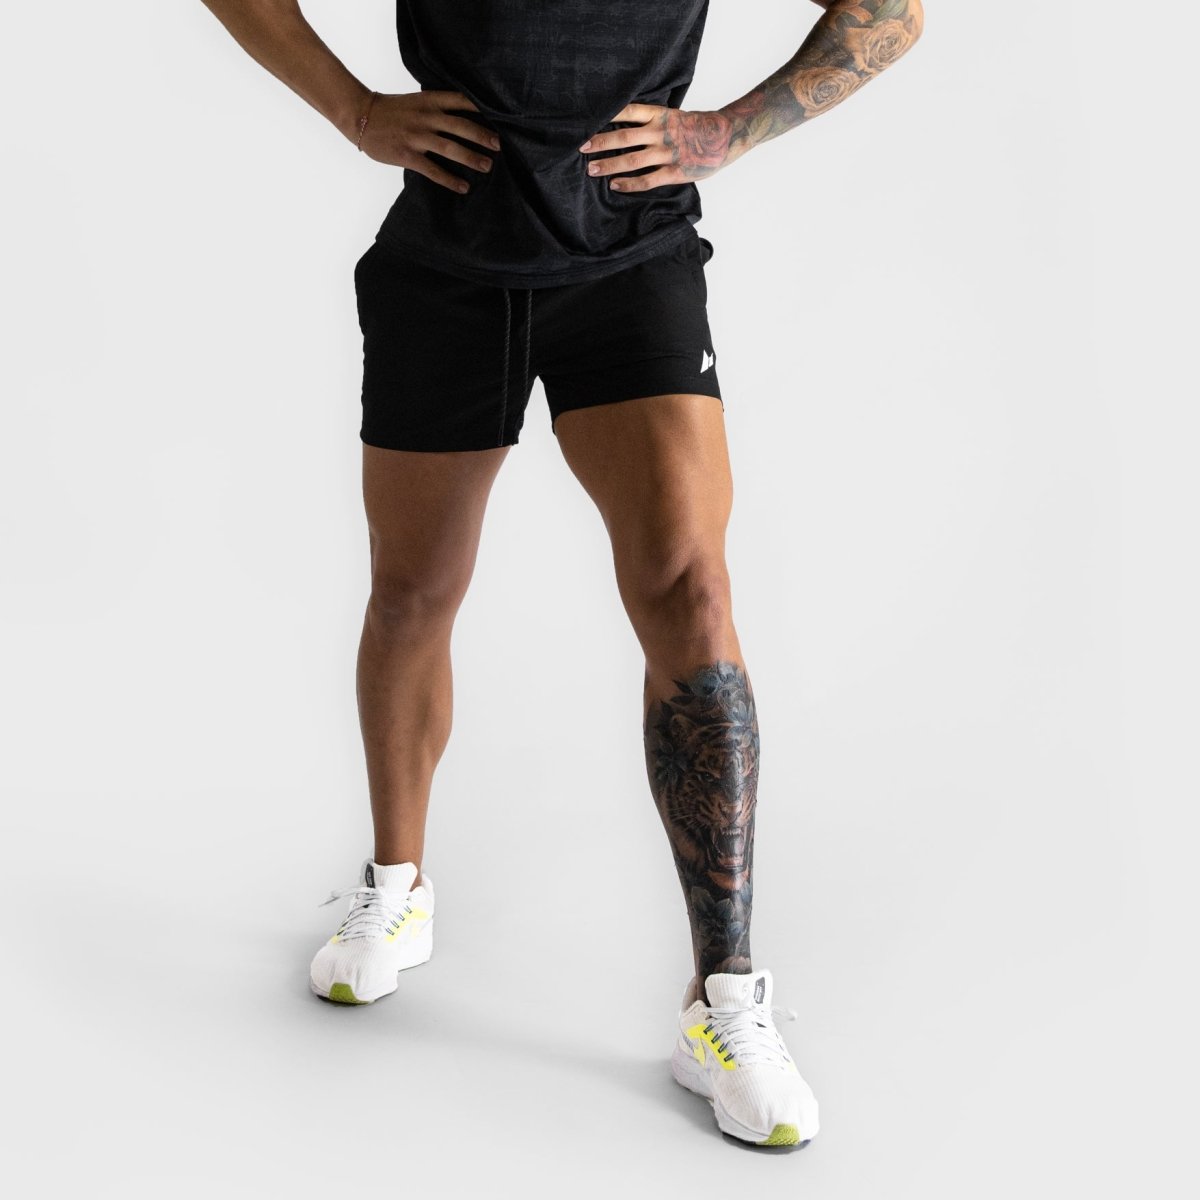 The “Best Workout Shorts” to Wear for Men 2023 - Zuva